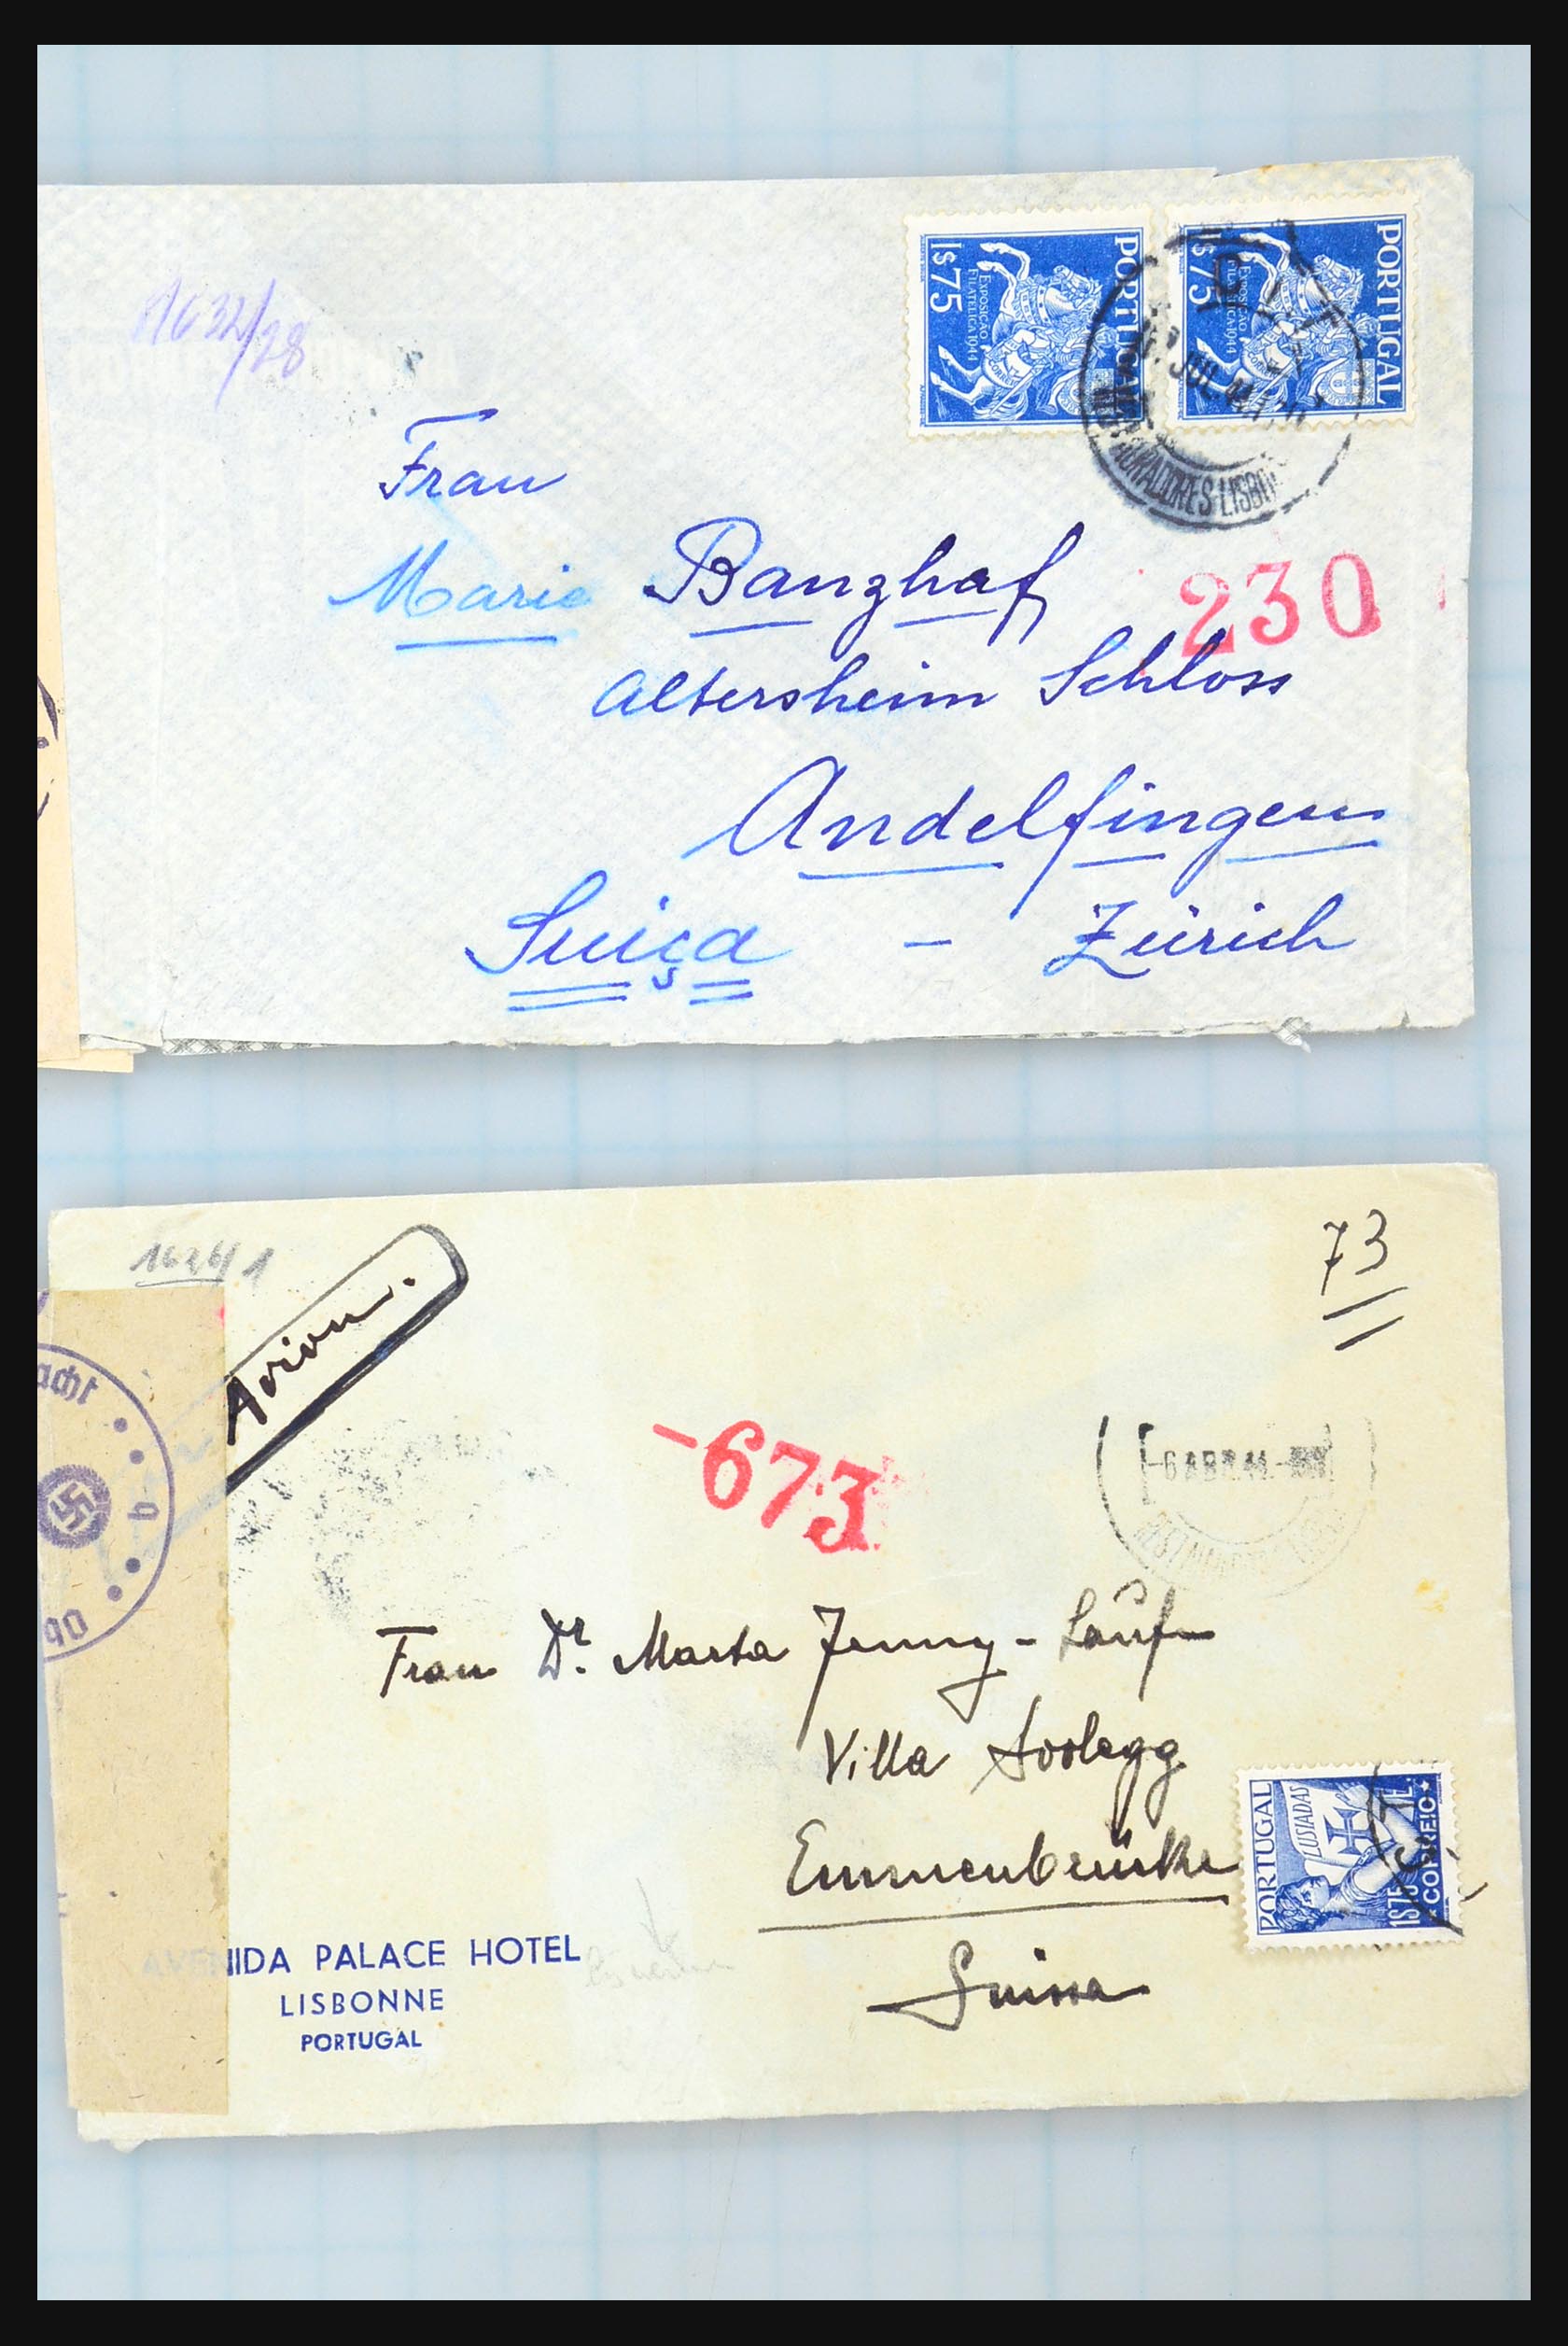 31358 250 - 31358 Portugal/Luxemburg/Greece covers 1880-1960.